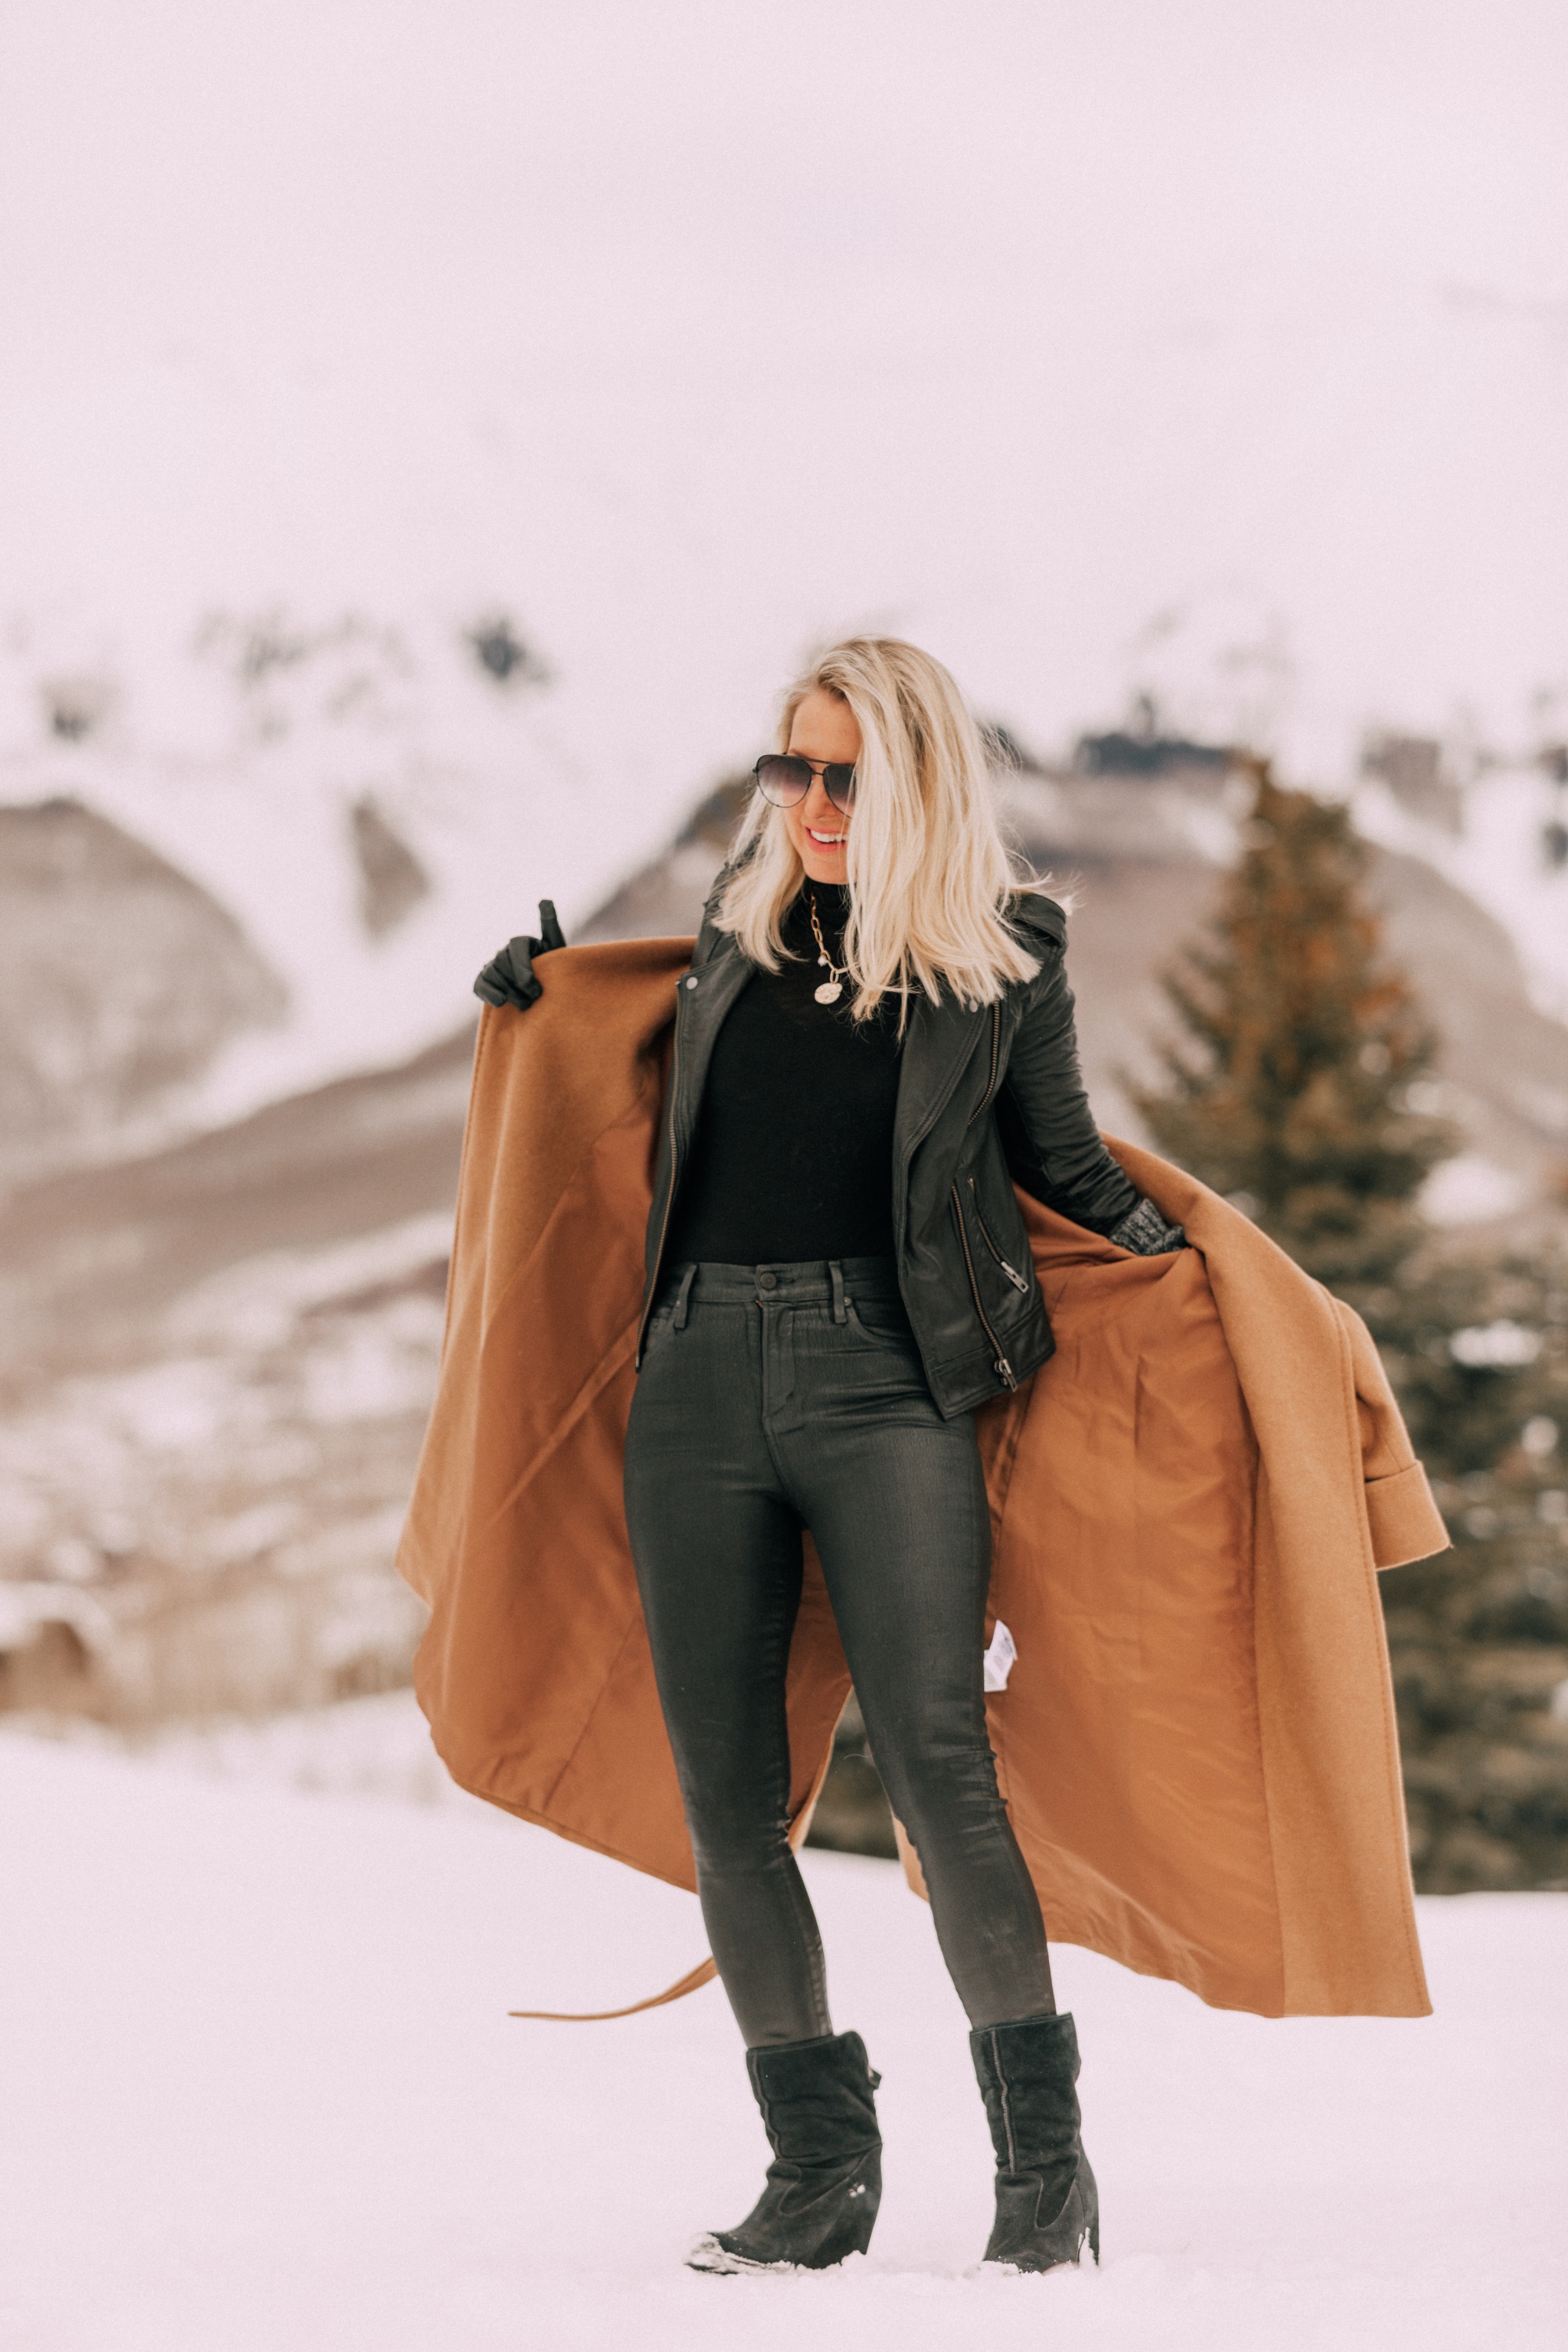 How To Layer A Moto Jacket, Fashion blogger Erin Busbee of BusbeeStyle.com wearing a black leather IRO moto jacket, Carolina Amato gloves, rocket leatherette skinny jeans by Citizens of Humanity, black cashmere turtleneck, and Ugg wedge boots and putting on a wool camel coat by Mackage in Telluride, CO